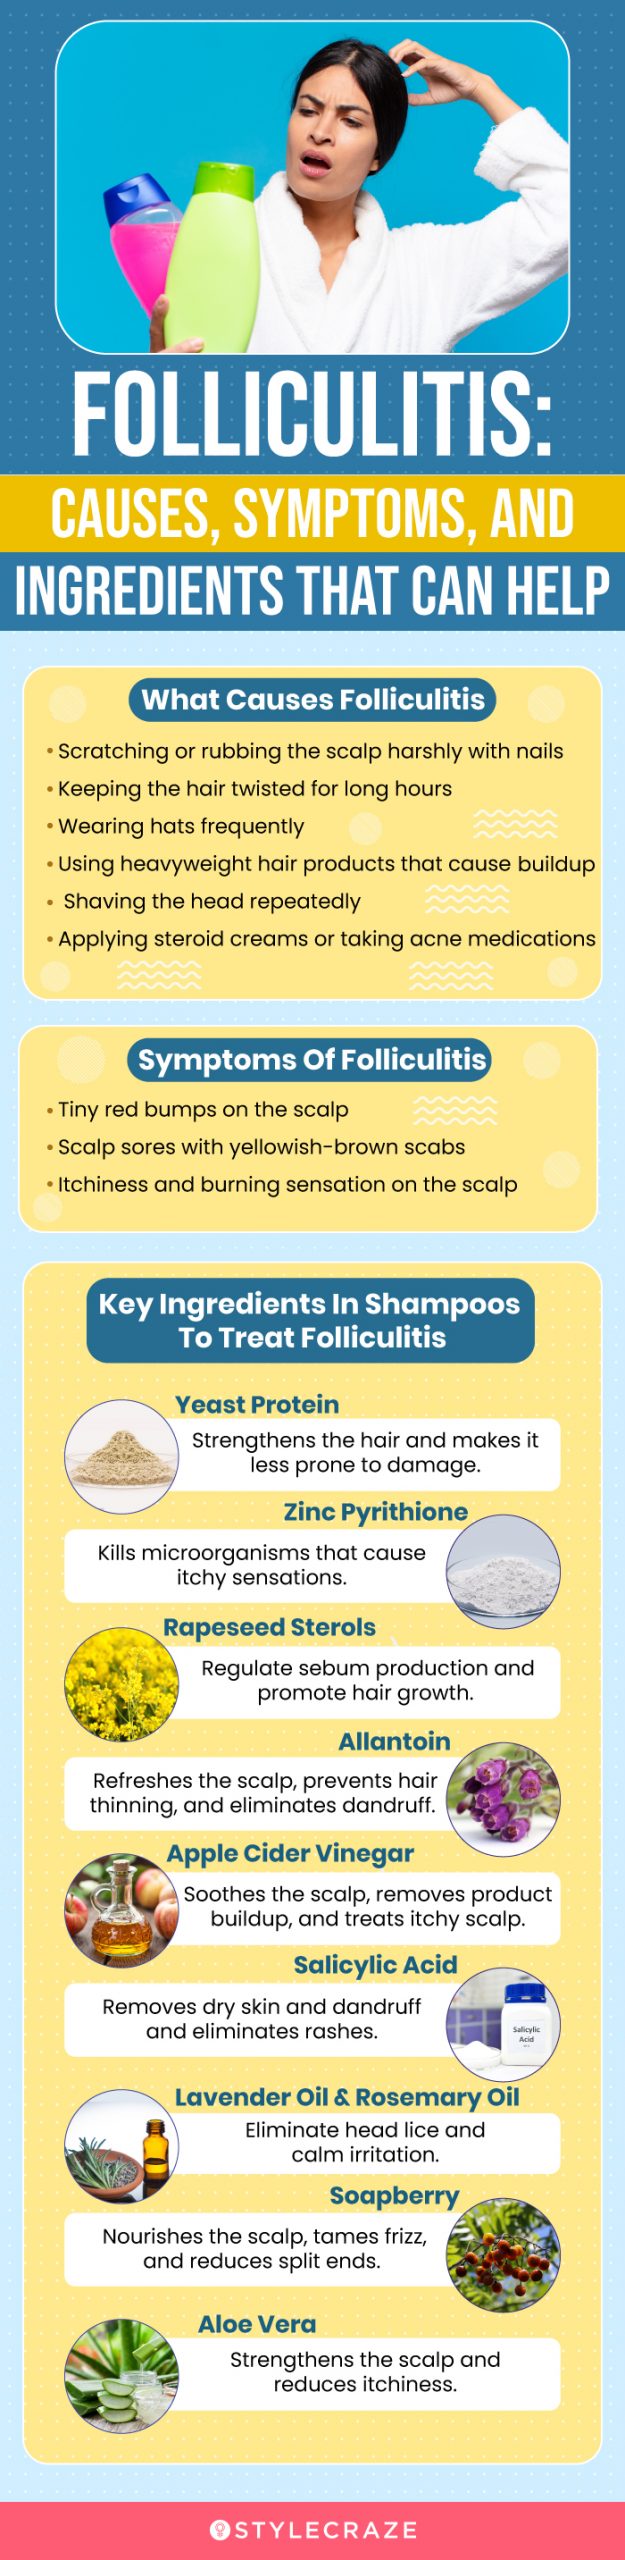 Folliculitis: Causes, Symptoms, And Beneficial Ingredients For Better Management (infographic)